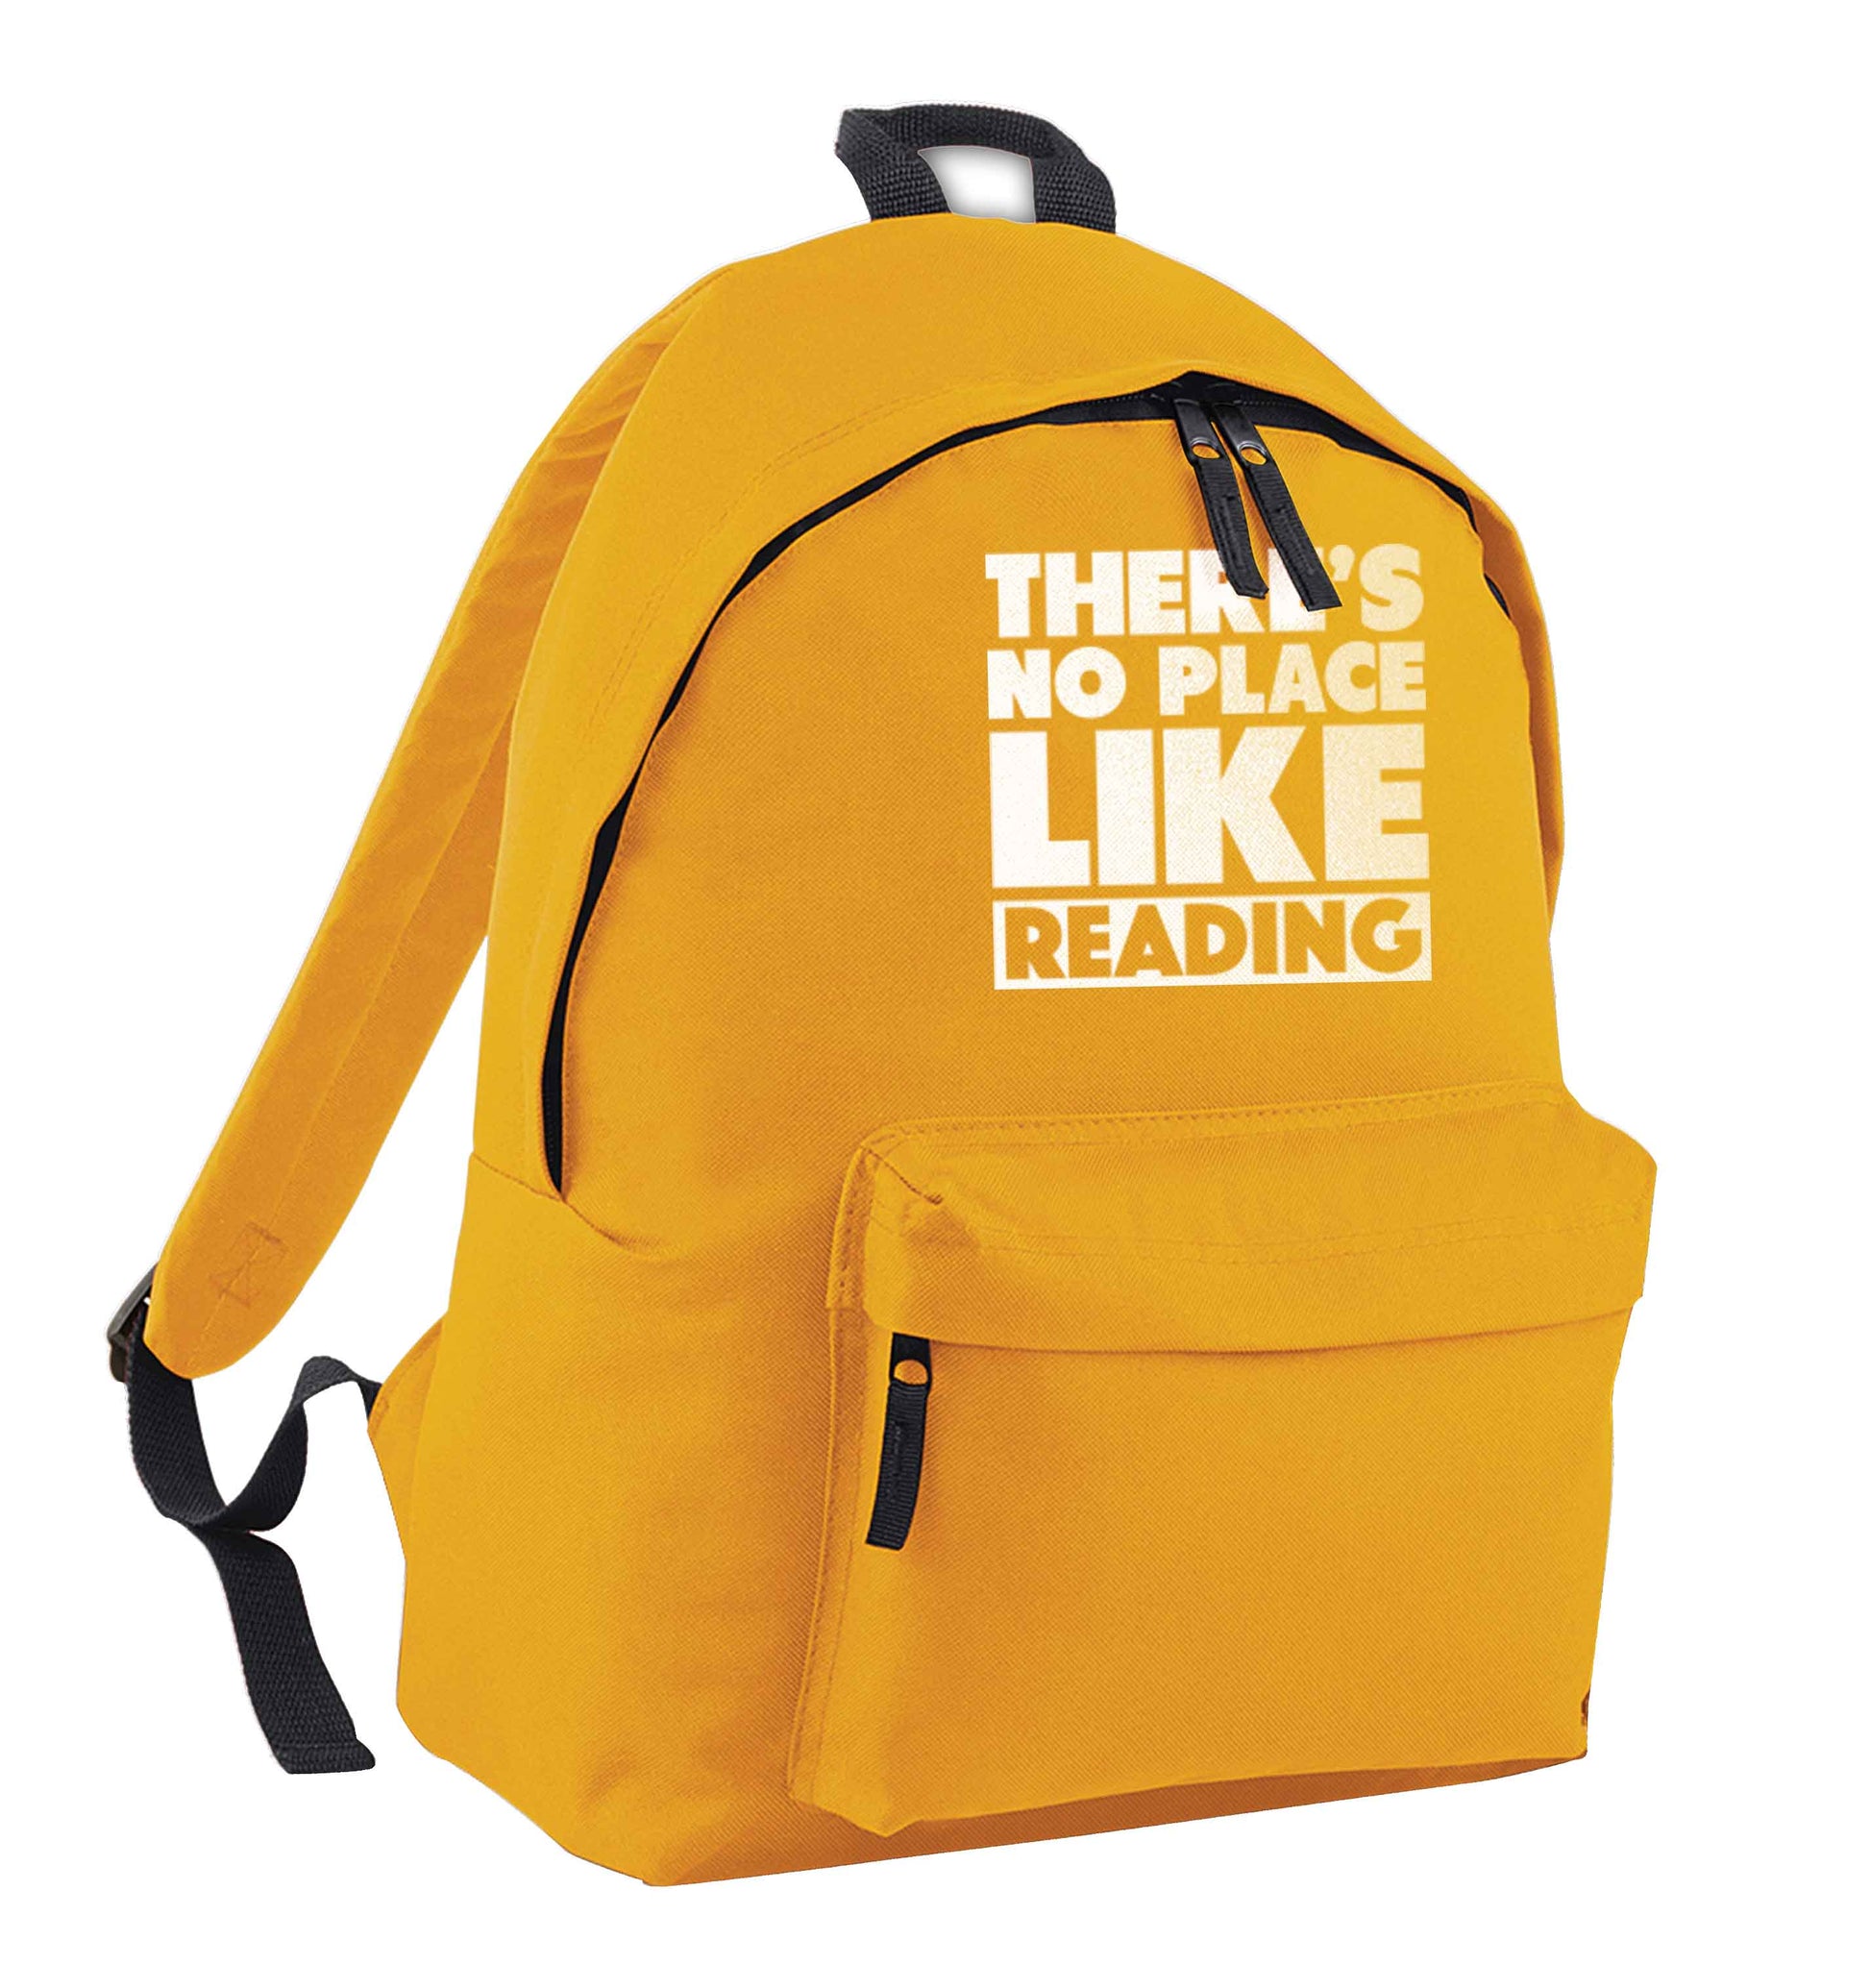 There's no place like Readingmustard adults backpack